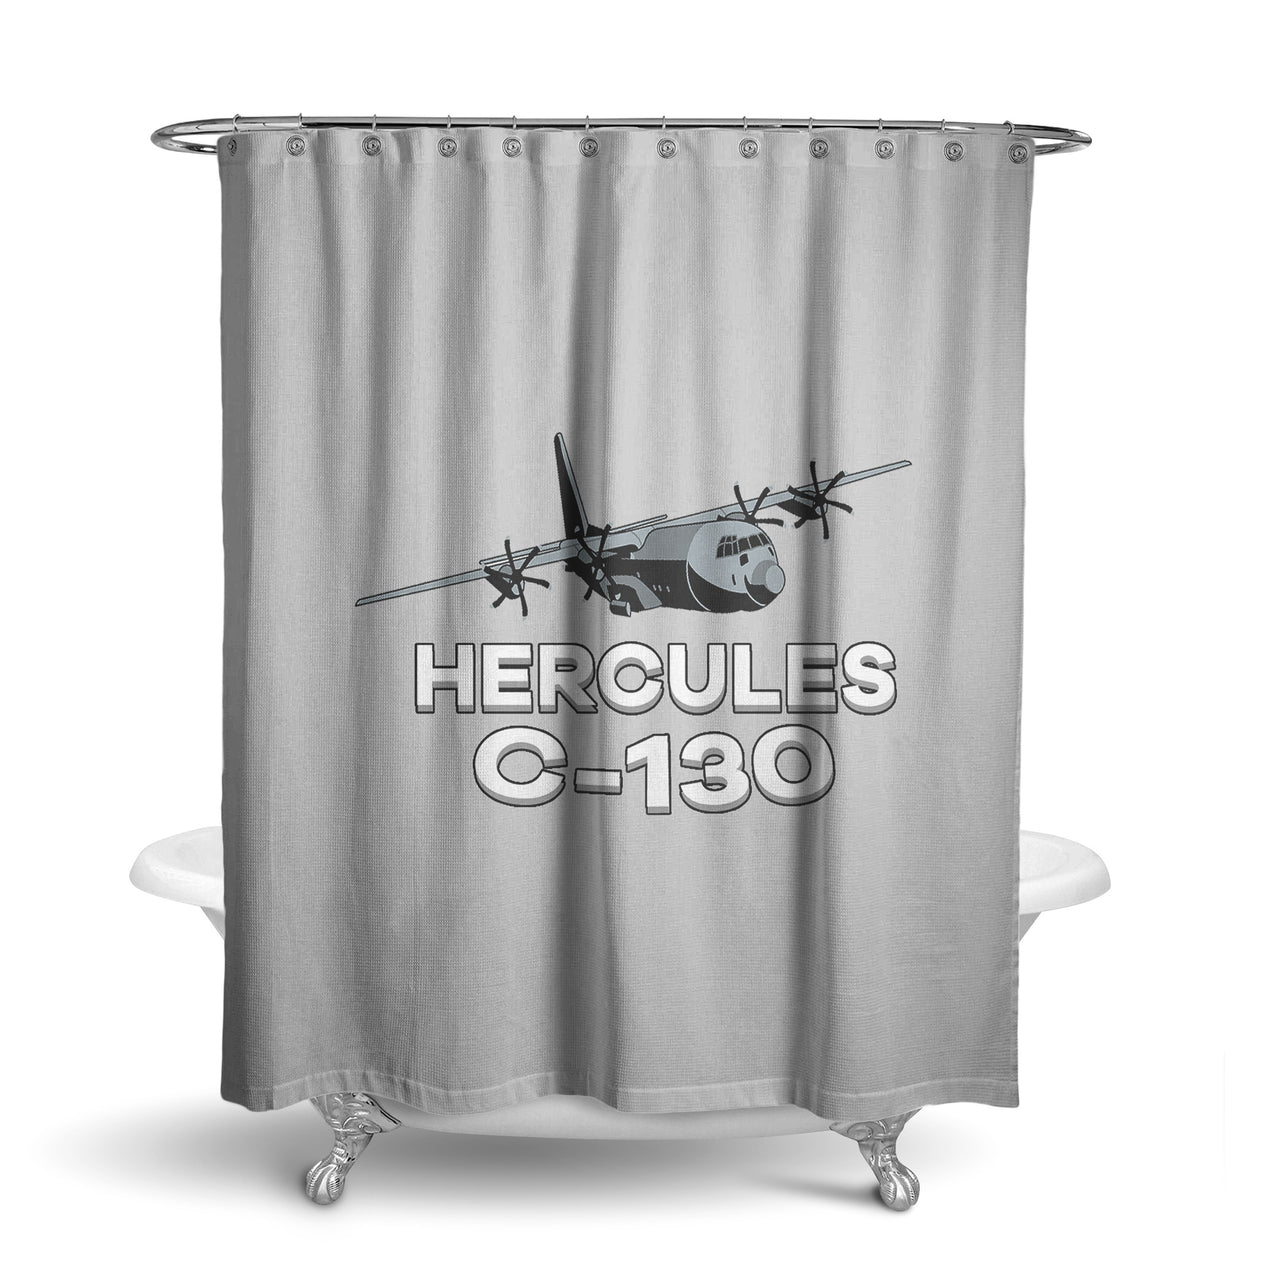 The Hercules C130 Designed Shower Curtains